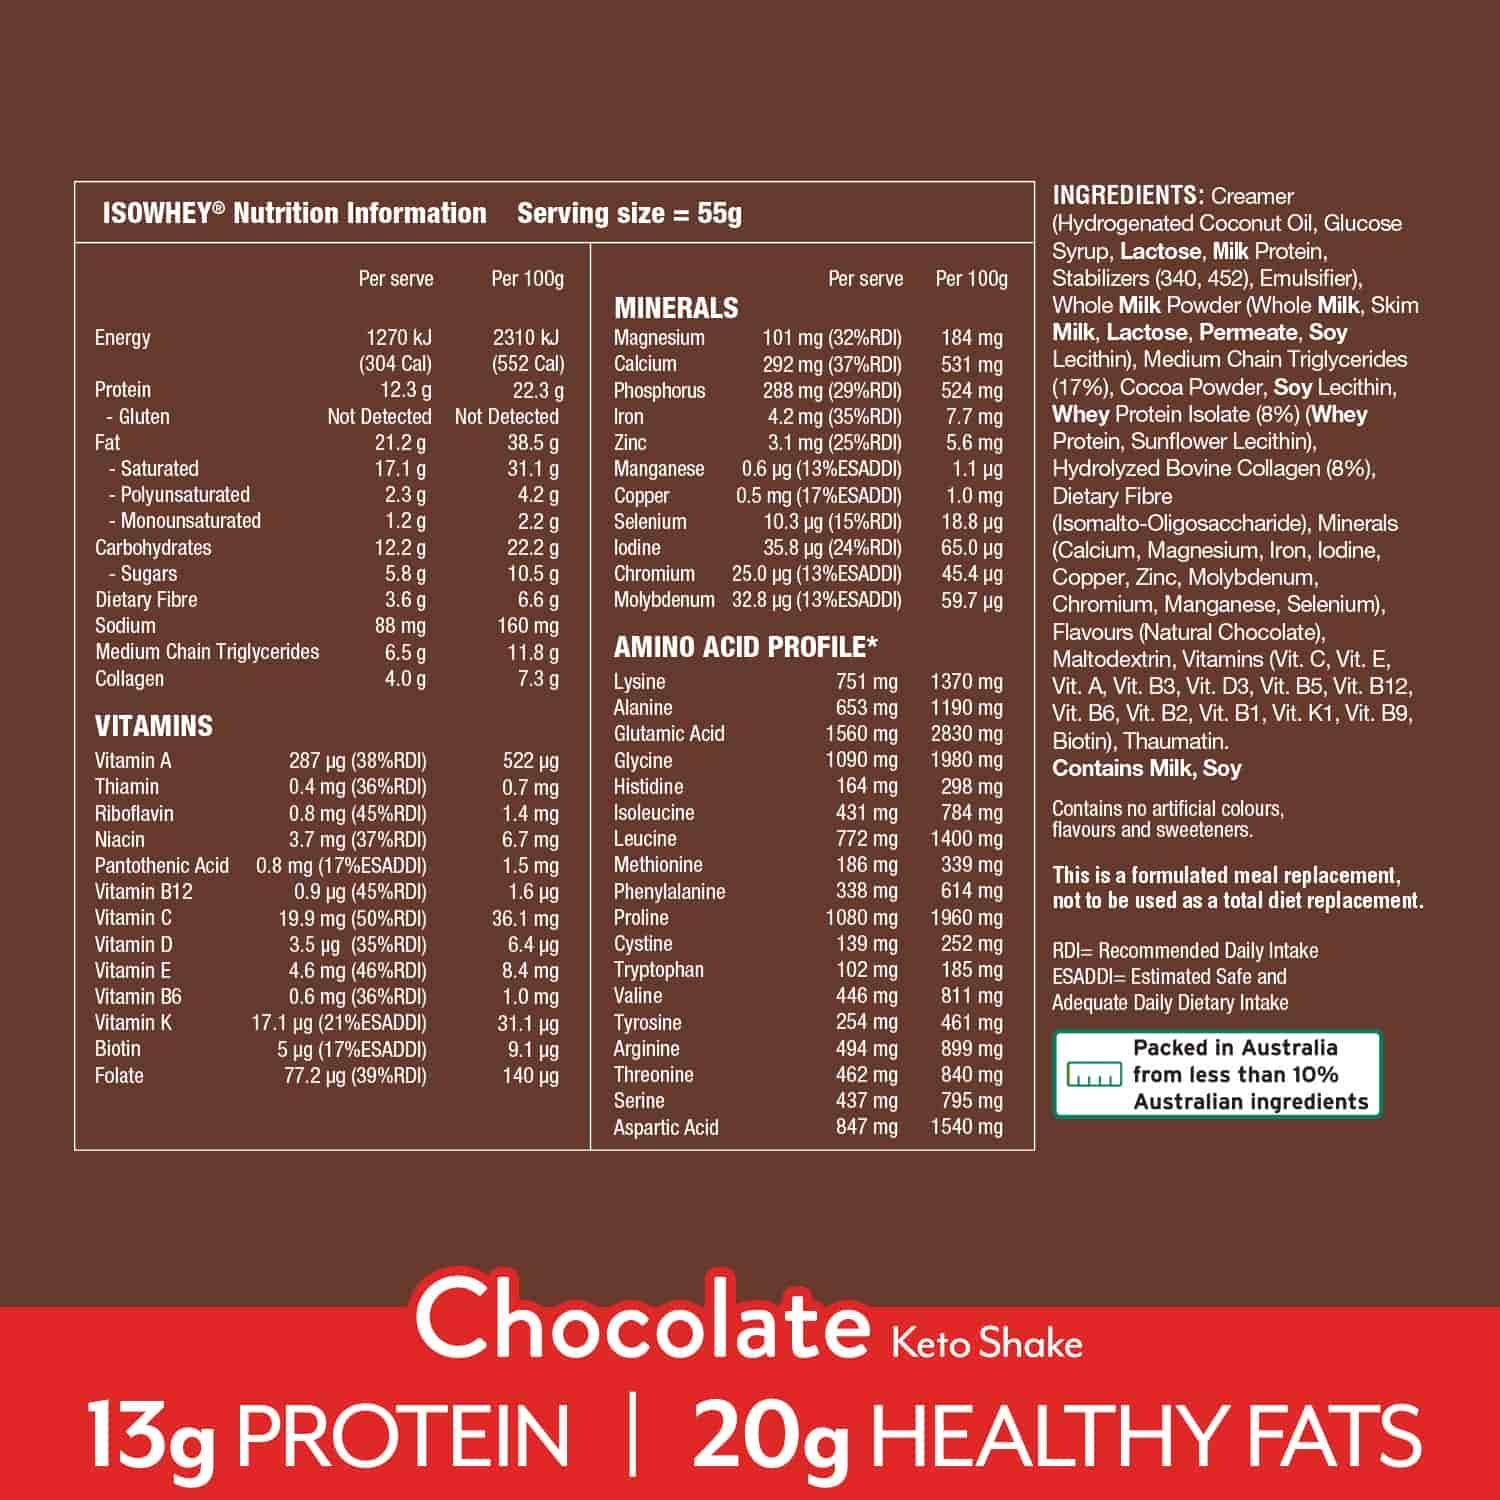 IsoWhey Keto Meal Replacement Shake Chocolate 550g Nutritional Information